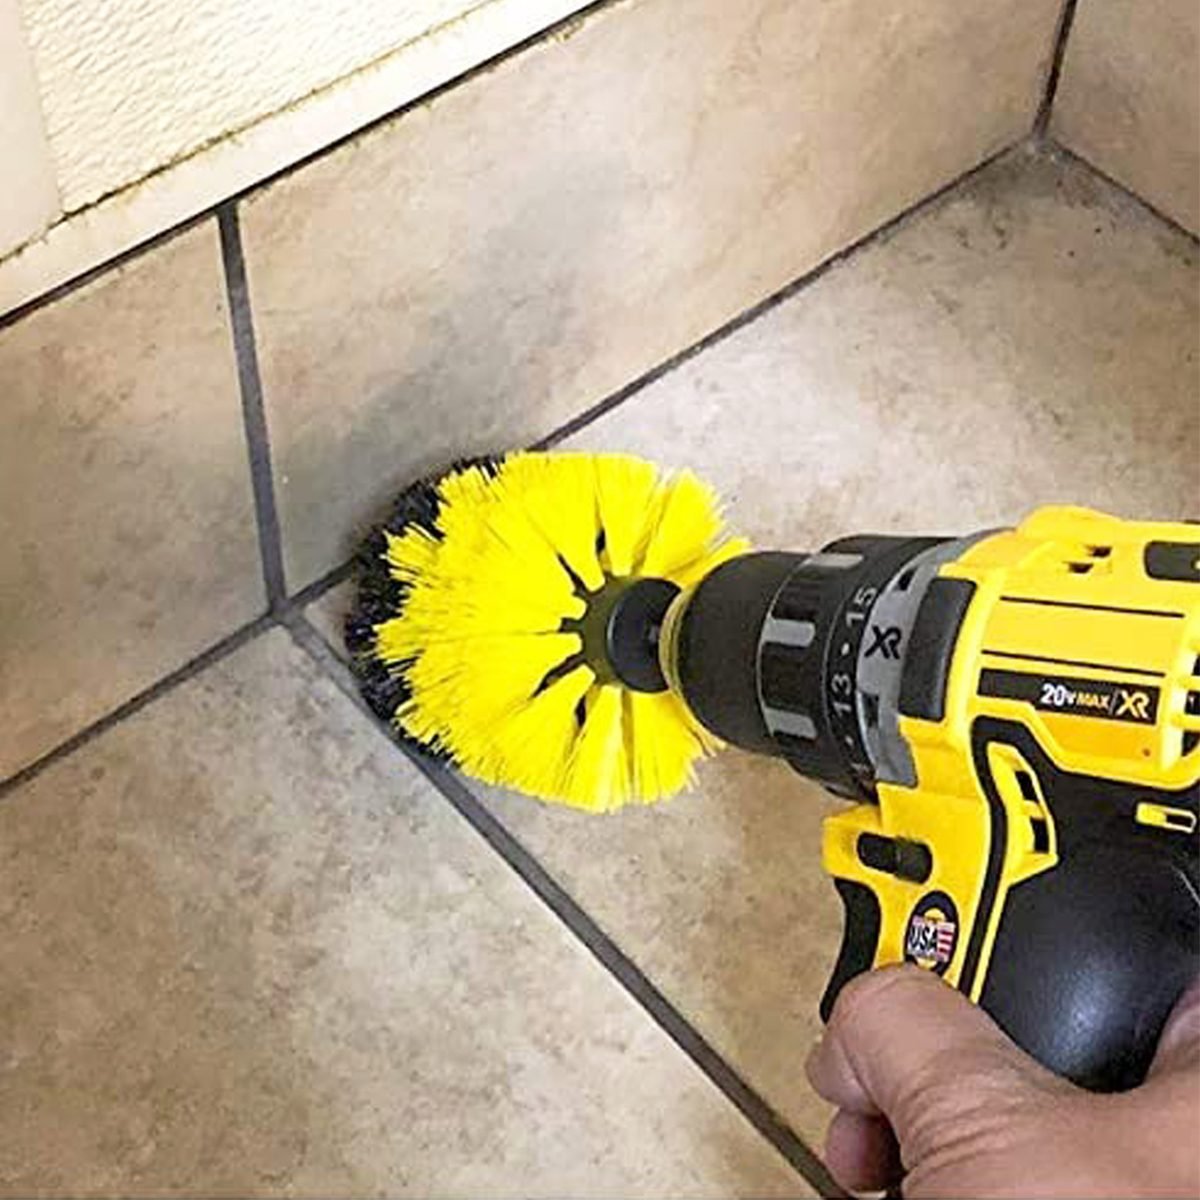 How to Clean a Drillbrush Power Scrubber